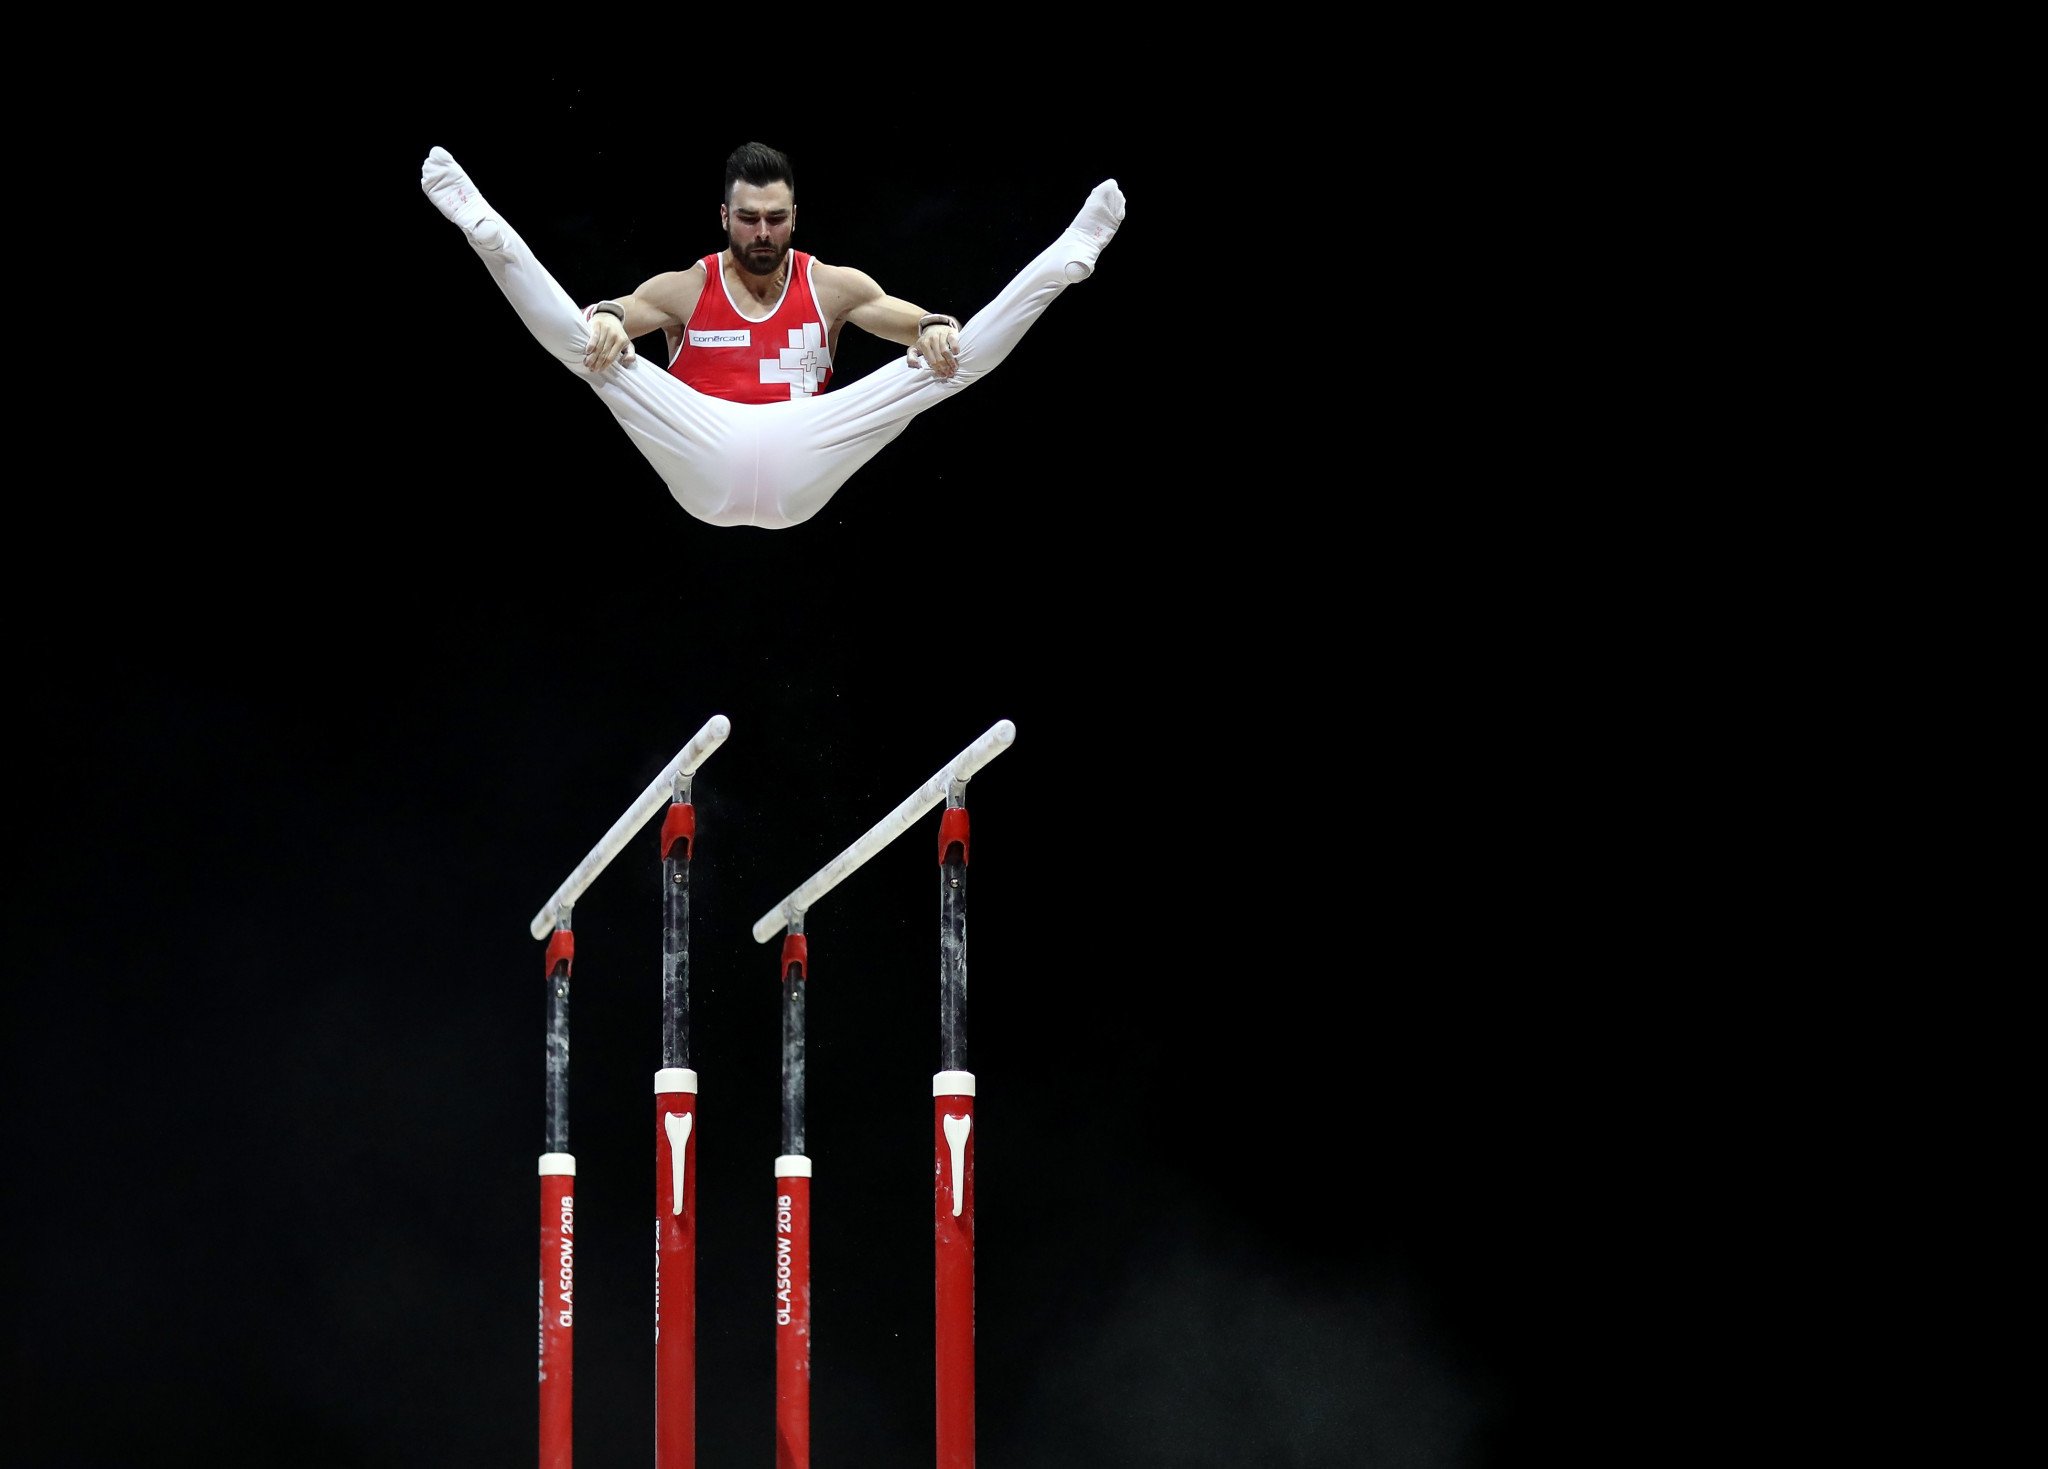 A host is being sought for the 2024 European Artistic Gymnastics Championships ©Getty Images